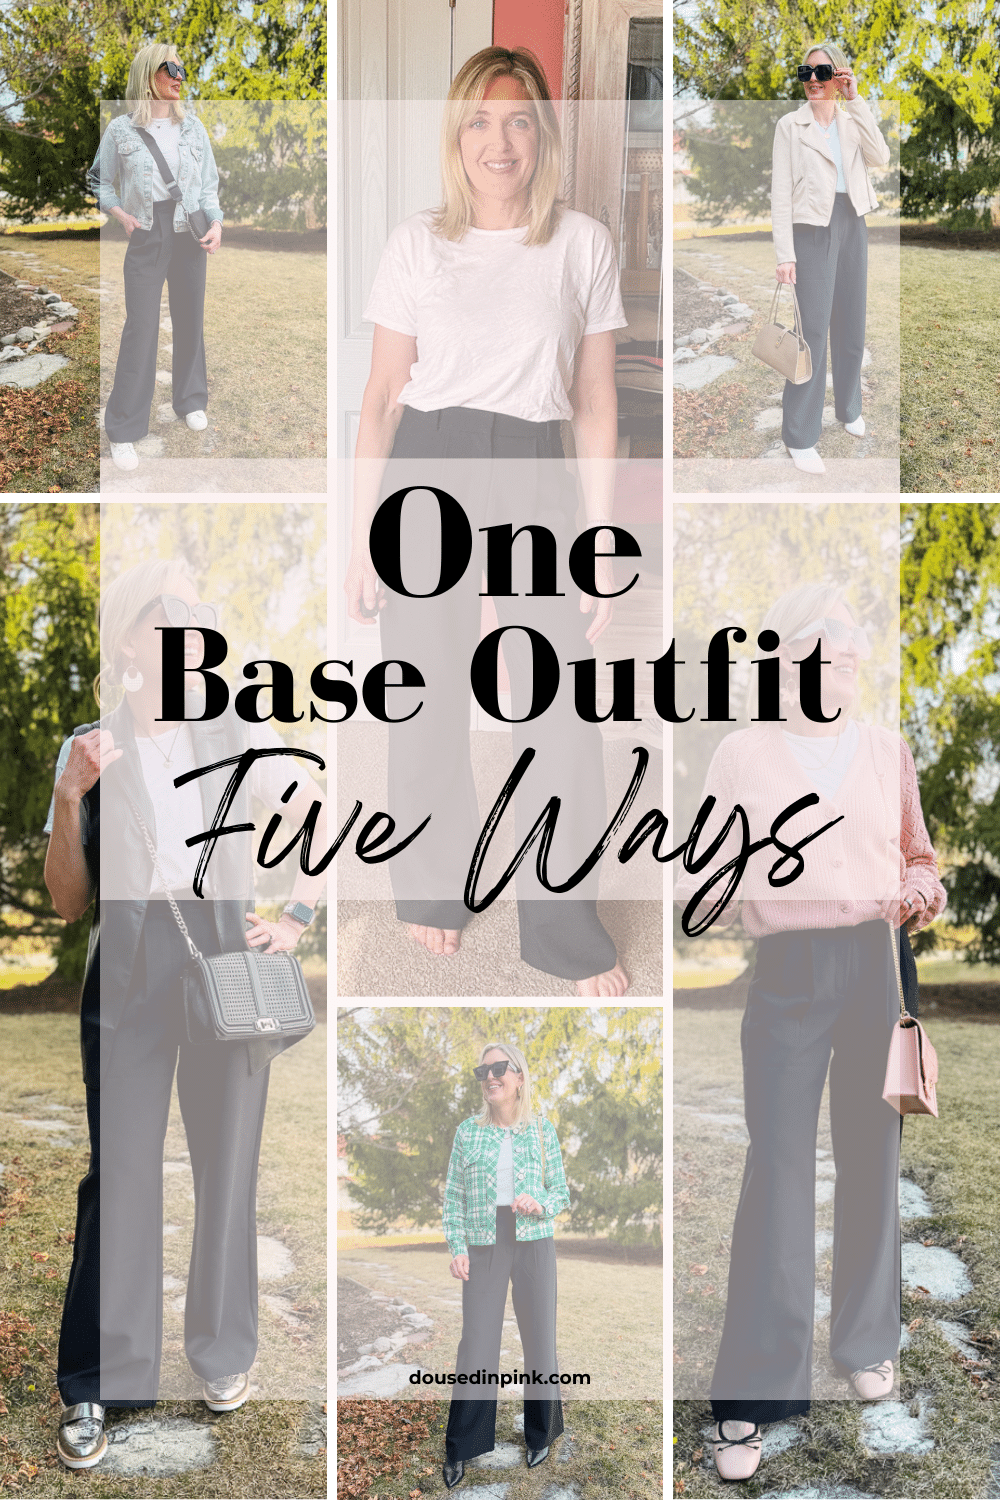 One base outfit, five ways